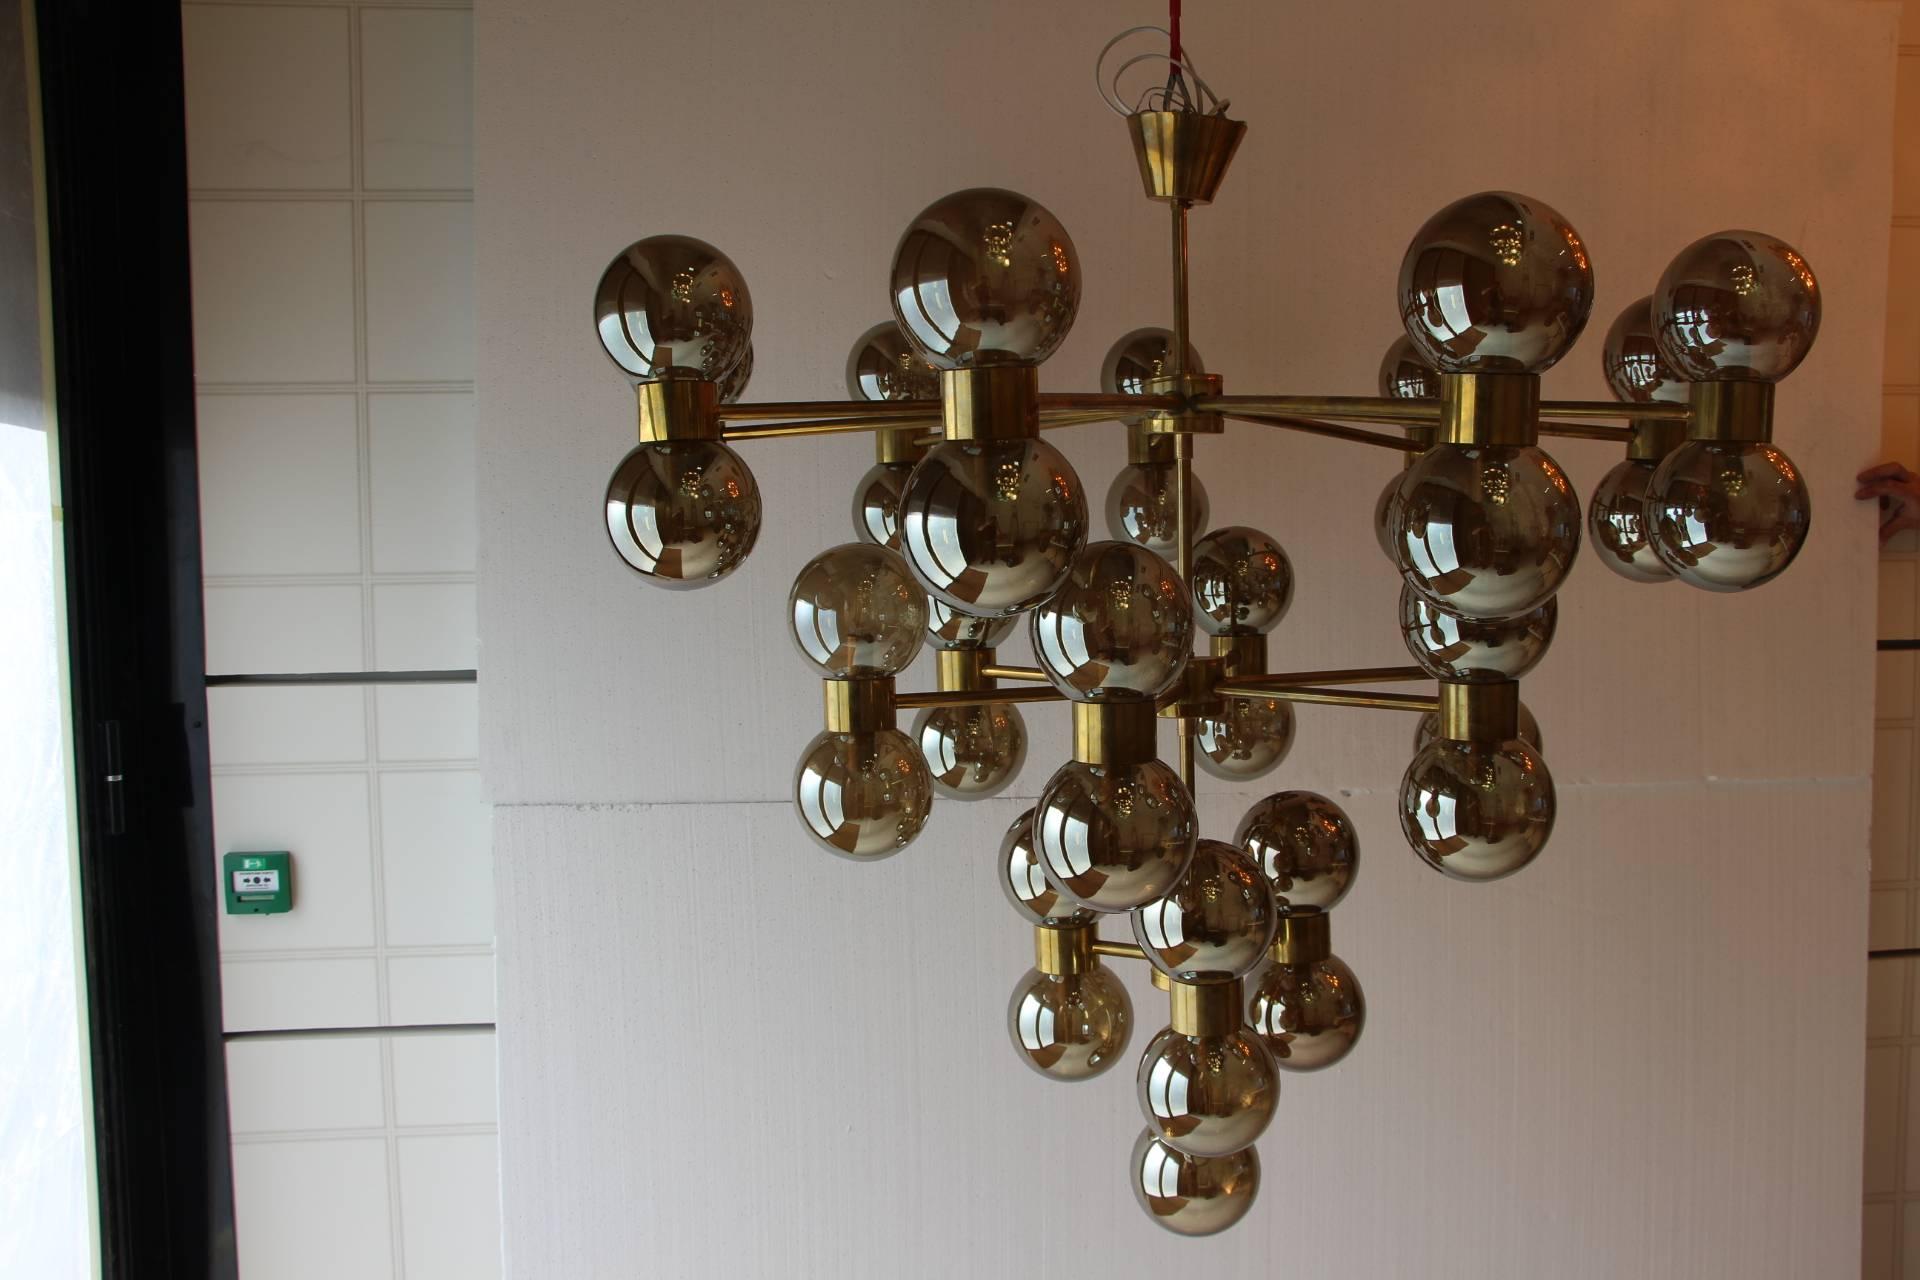 This very unusual three-tiered chandelier features thirty-seven lights and mercurised silver glass globes on a brass structure. When light is on, its globes turn to golden color and give a very warm golden color.
It has got a beautiful design, very